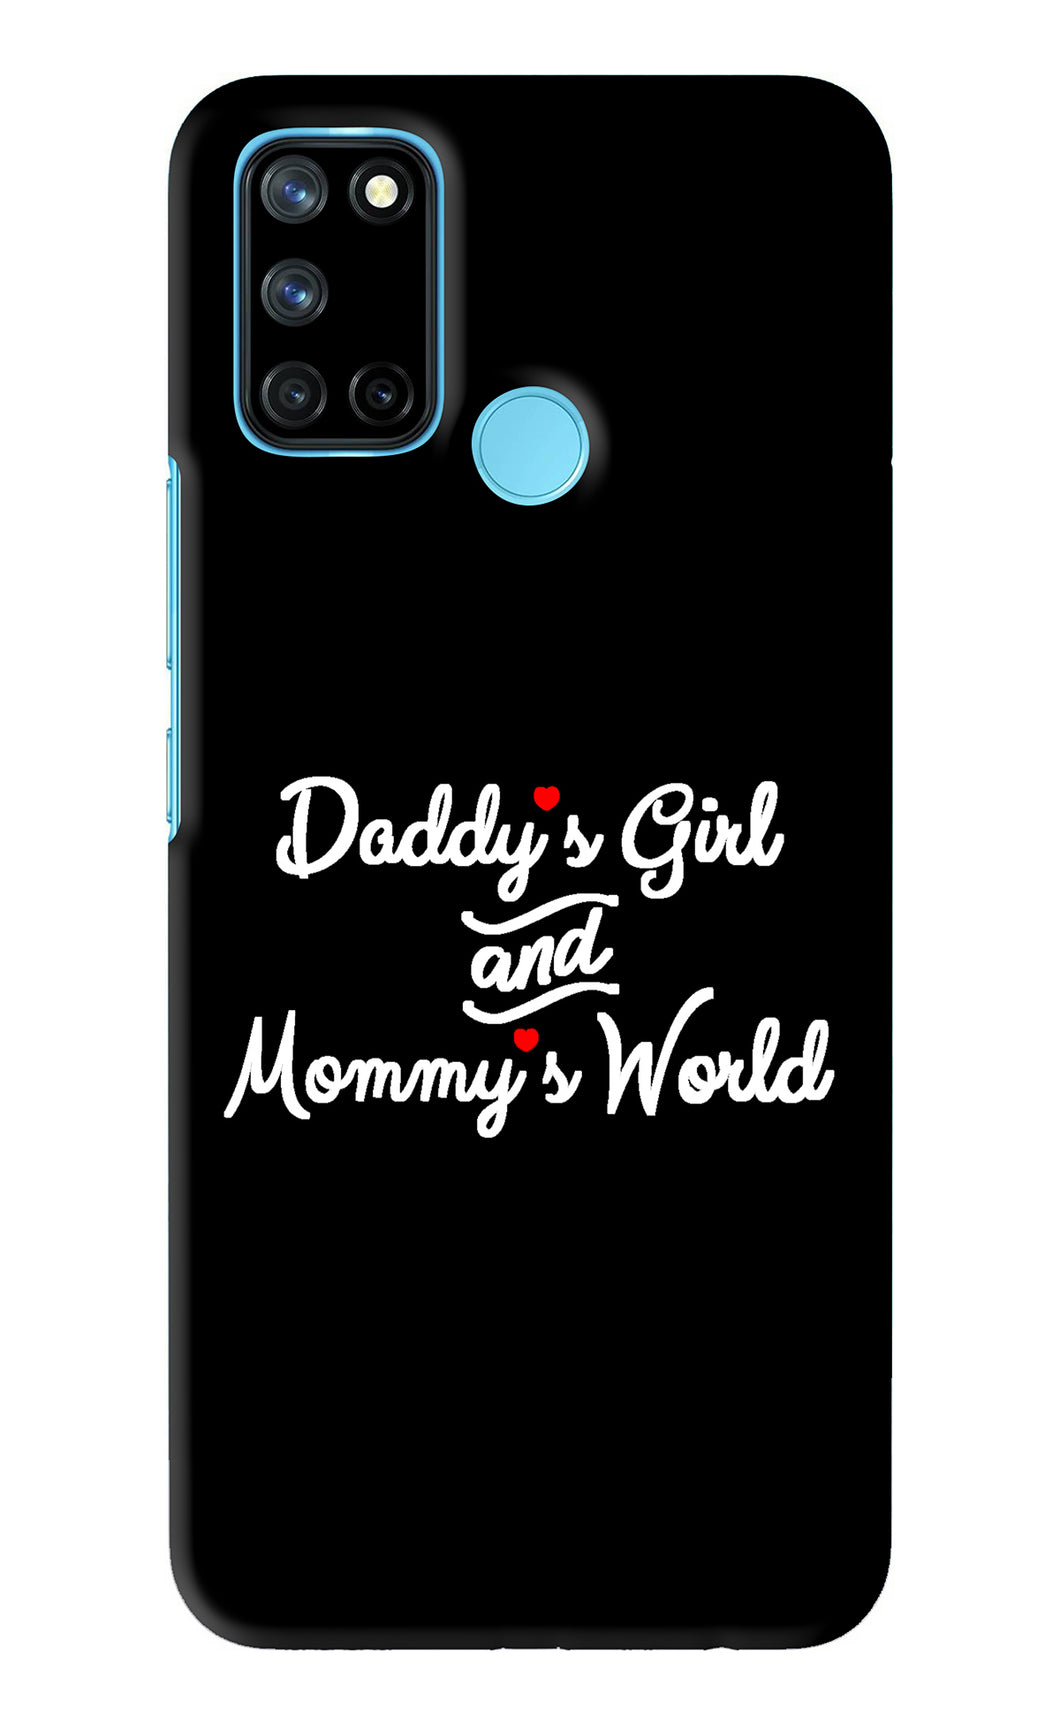 Daddy's Girl and Mommy's World Realme C17 Back Skin Wrap